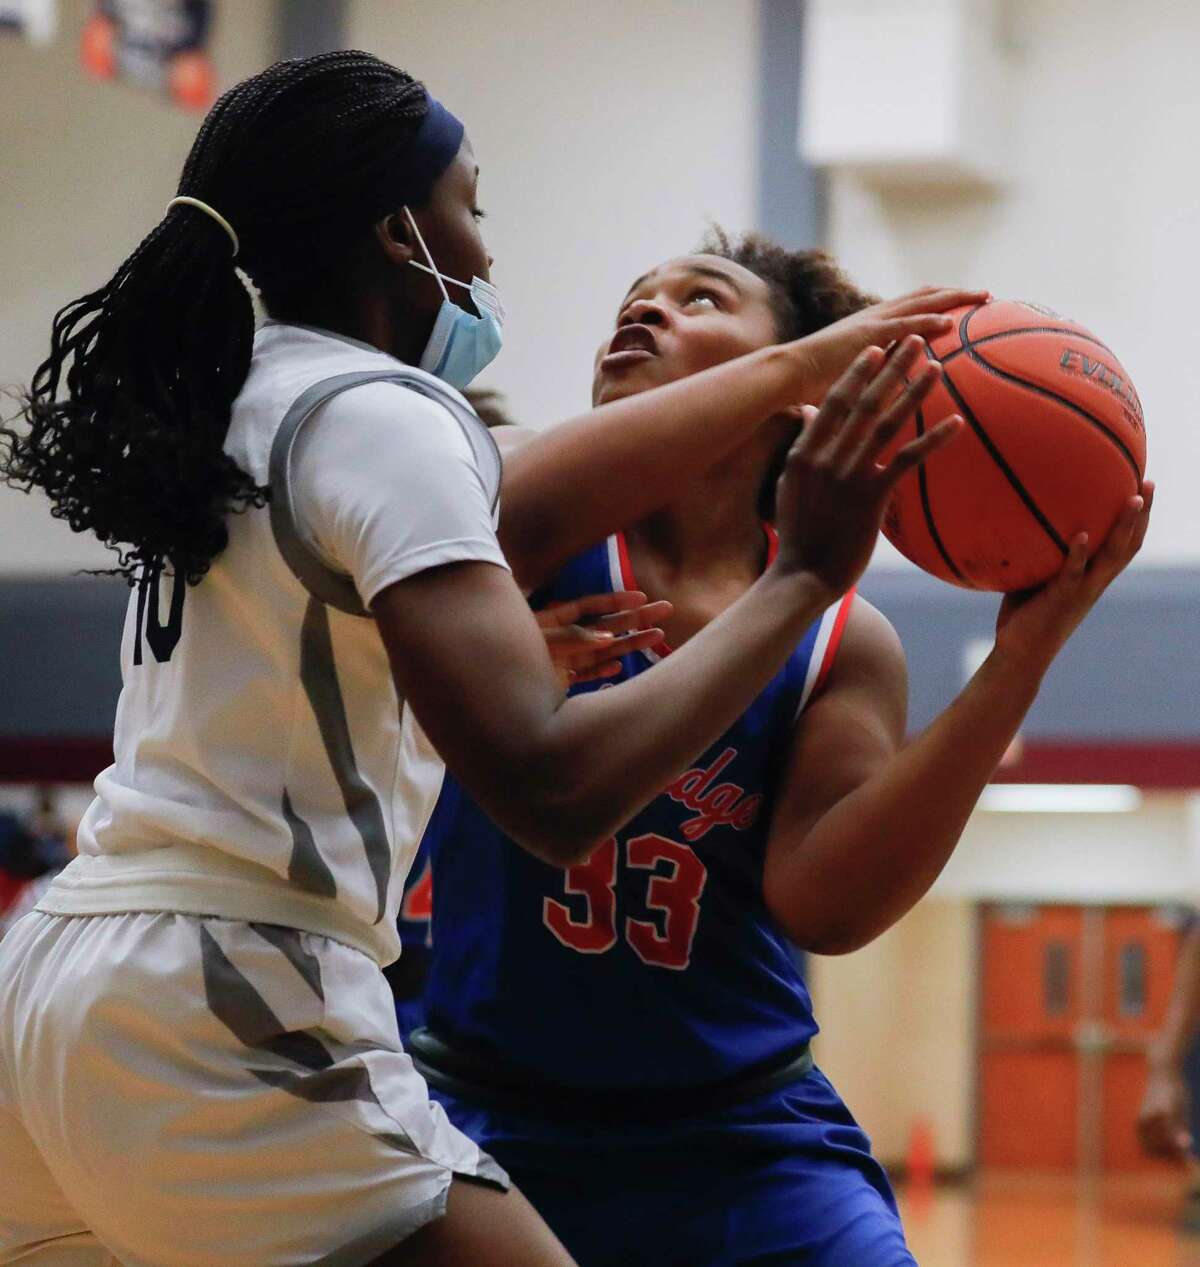 Oak Ridge center Raniyah Lewis (33) goes up for a basket against College Park power forward Ali Diop (10) during the first quarter of a District 15-6A high school basketball game at College Park High School, Wednesday, Jan. 20, 2021, in The Woodlands.